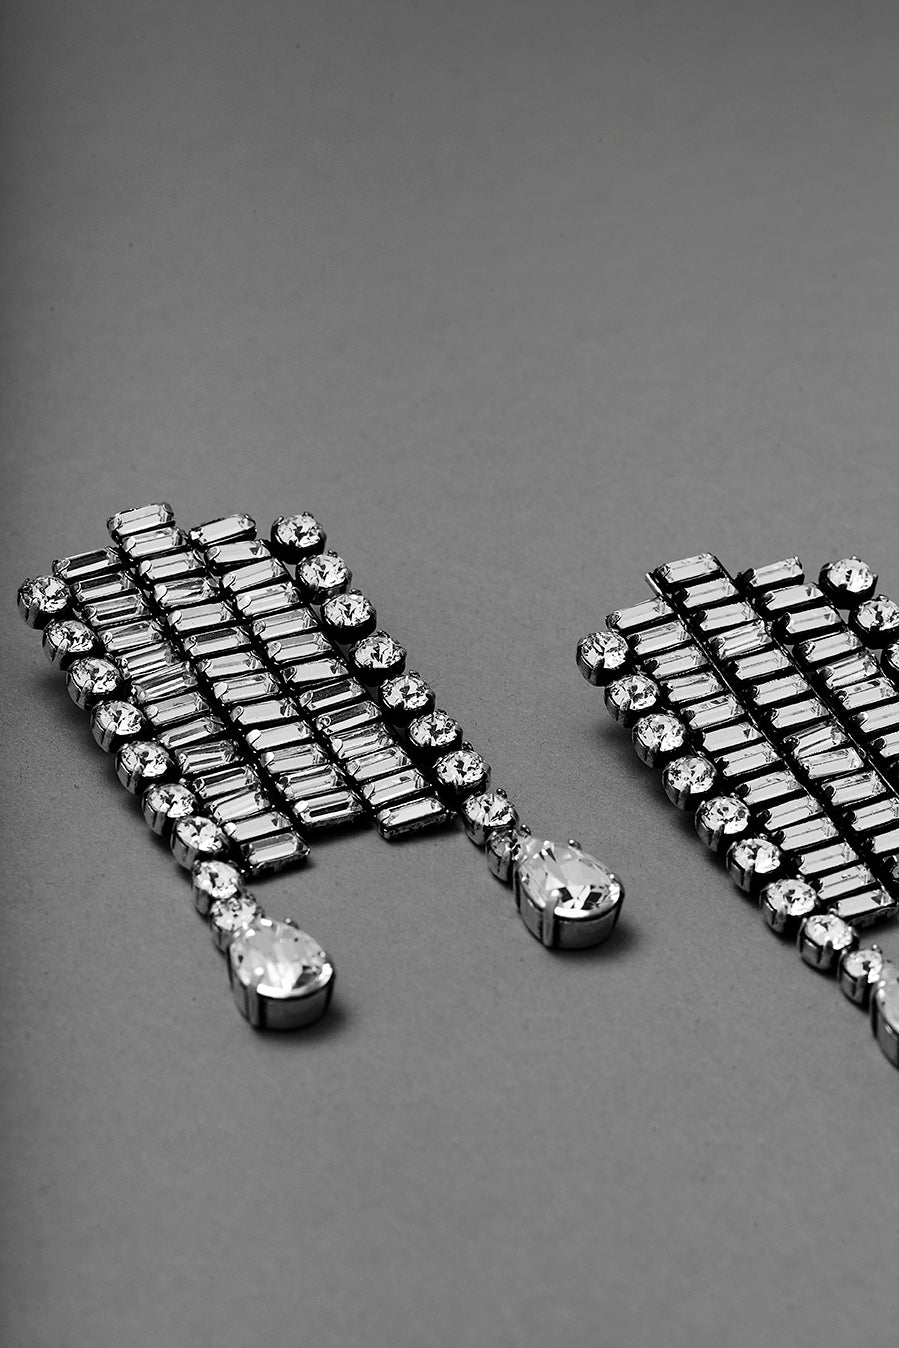 Details of AEIDES statement earrings made by ANEIDA Jewelry in silver plated brass with Swarovski crystals